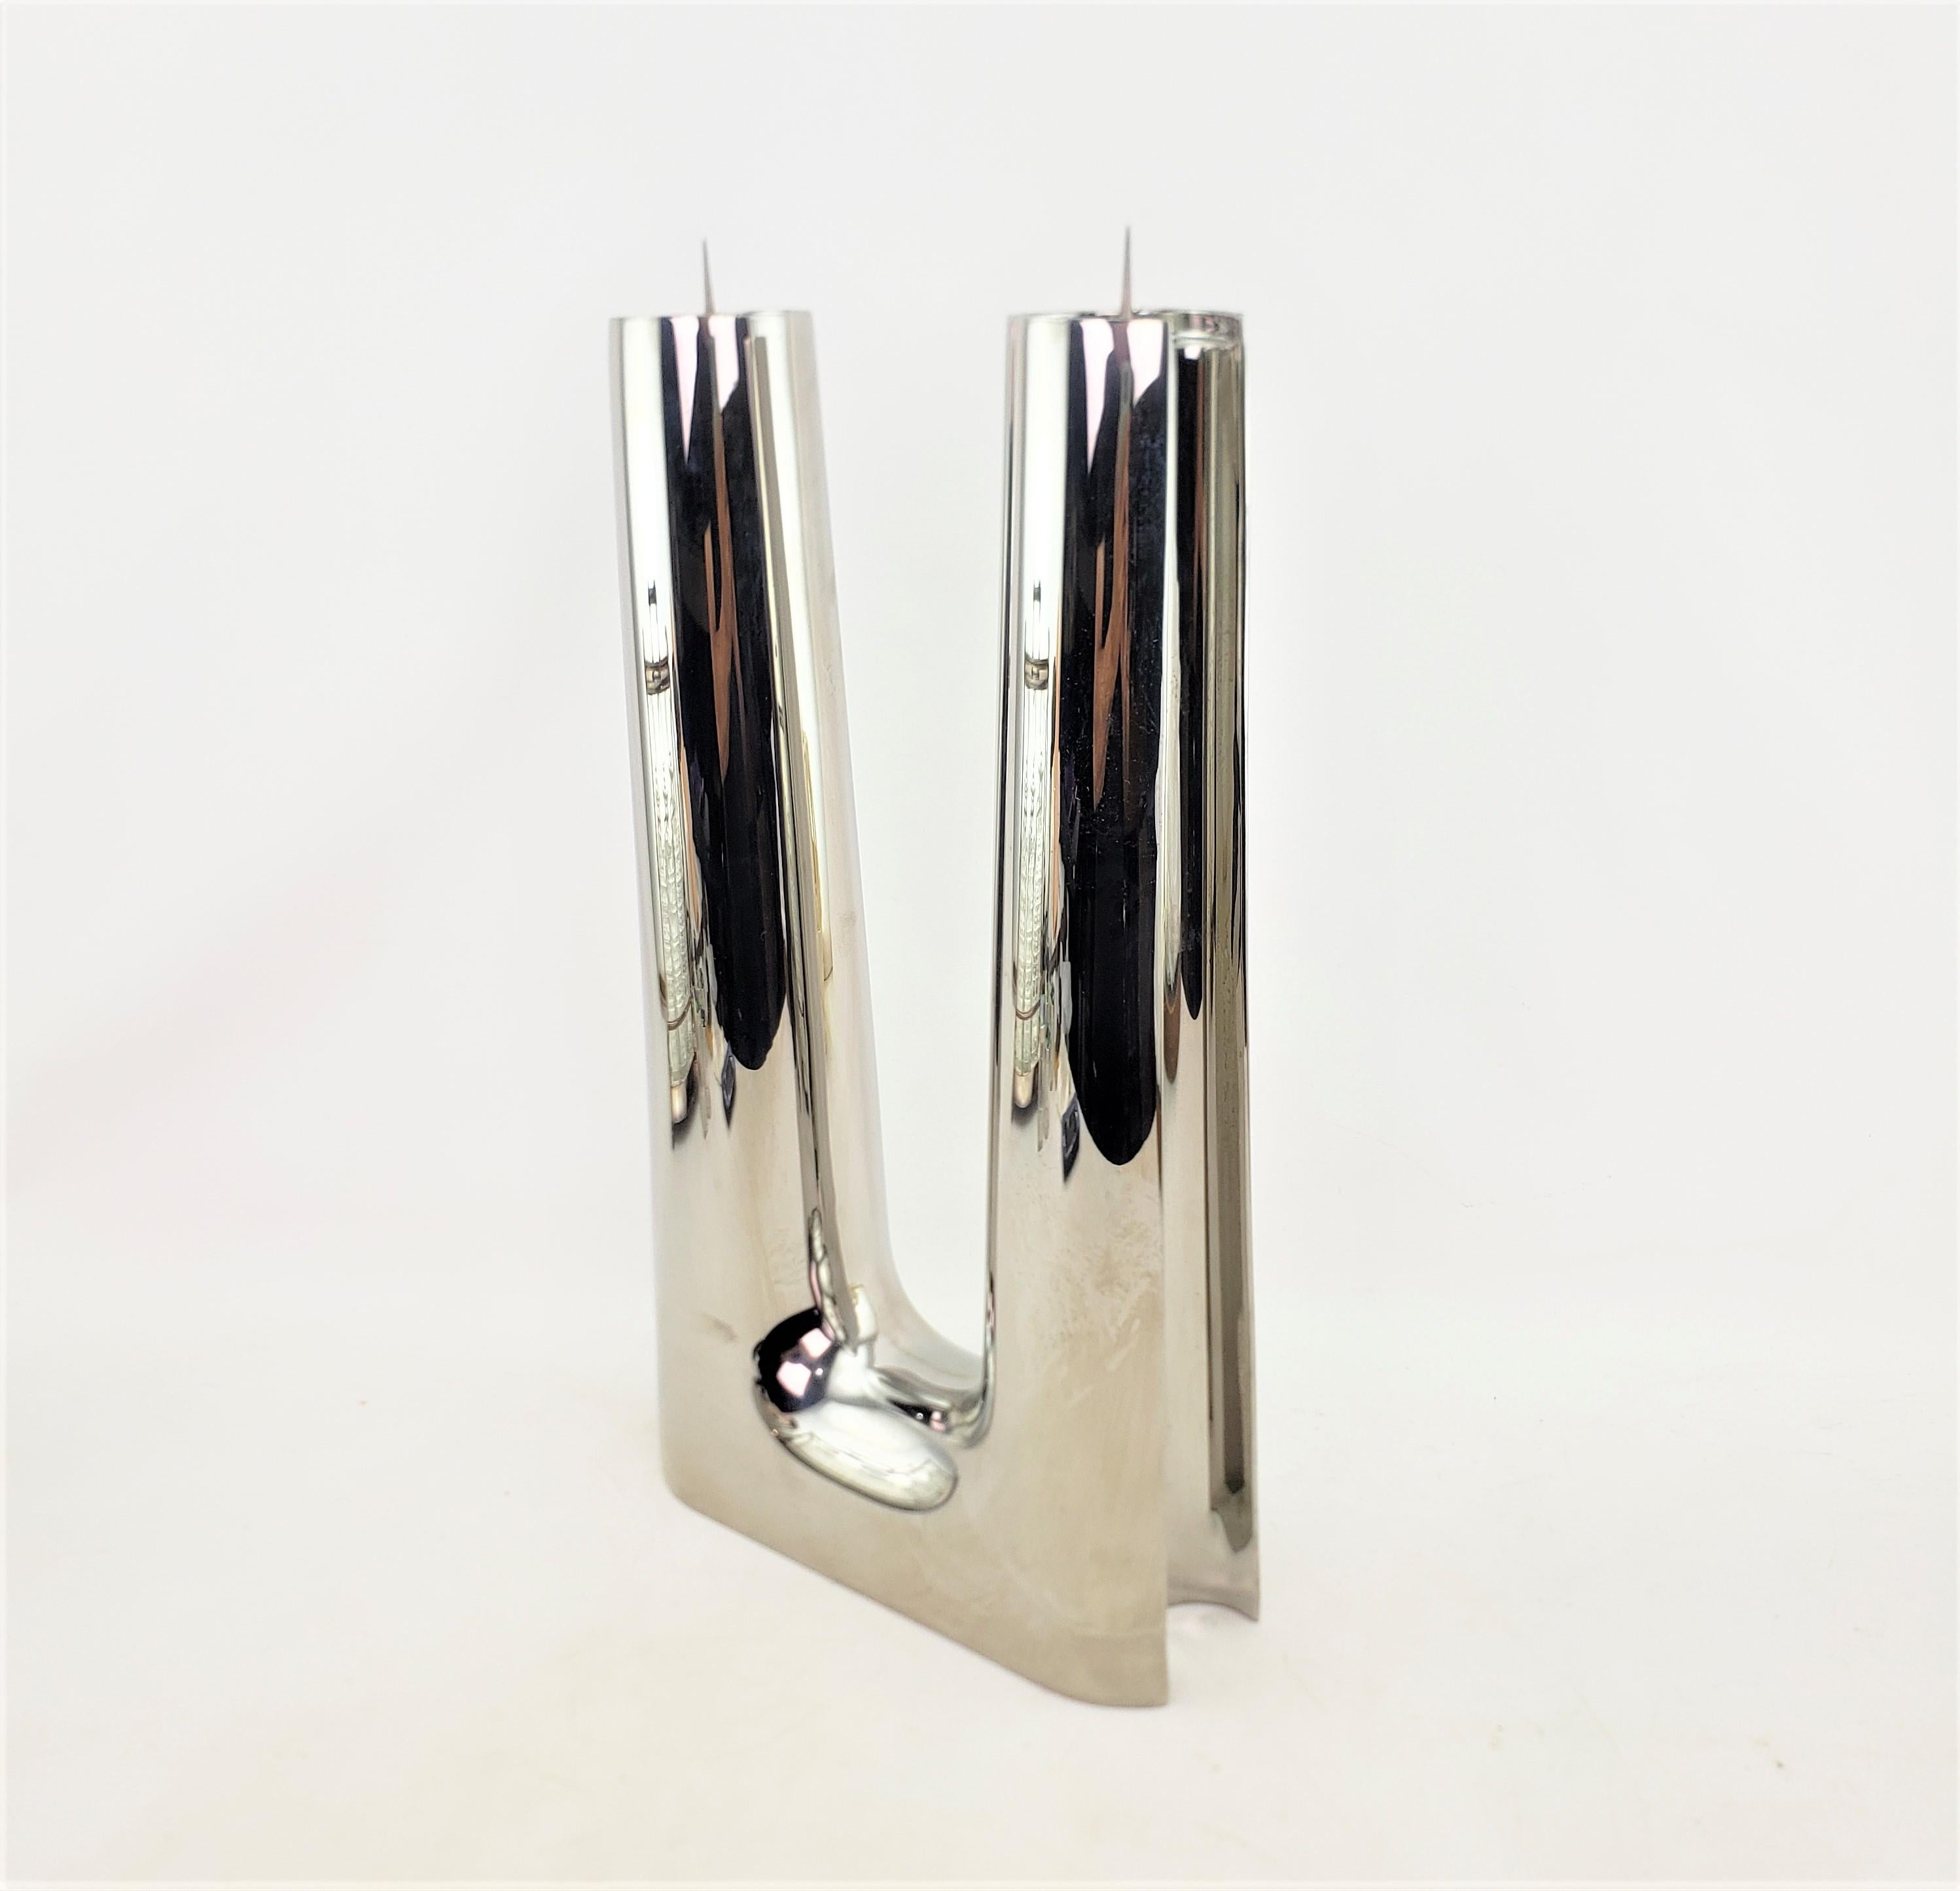 Machine-Made Contemporary Georg Jensen Polished Stainless Steel Candle Holder or Candelabra For Sale